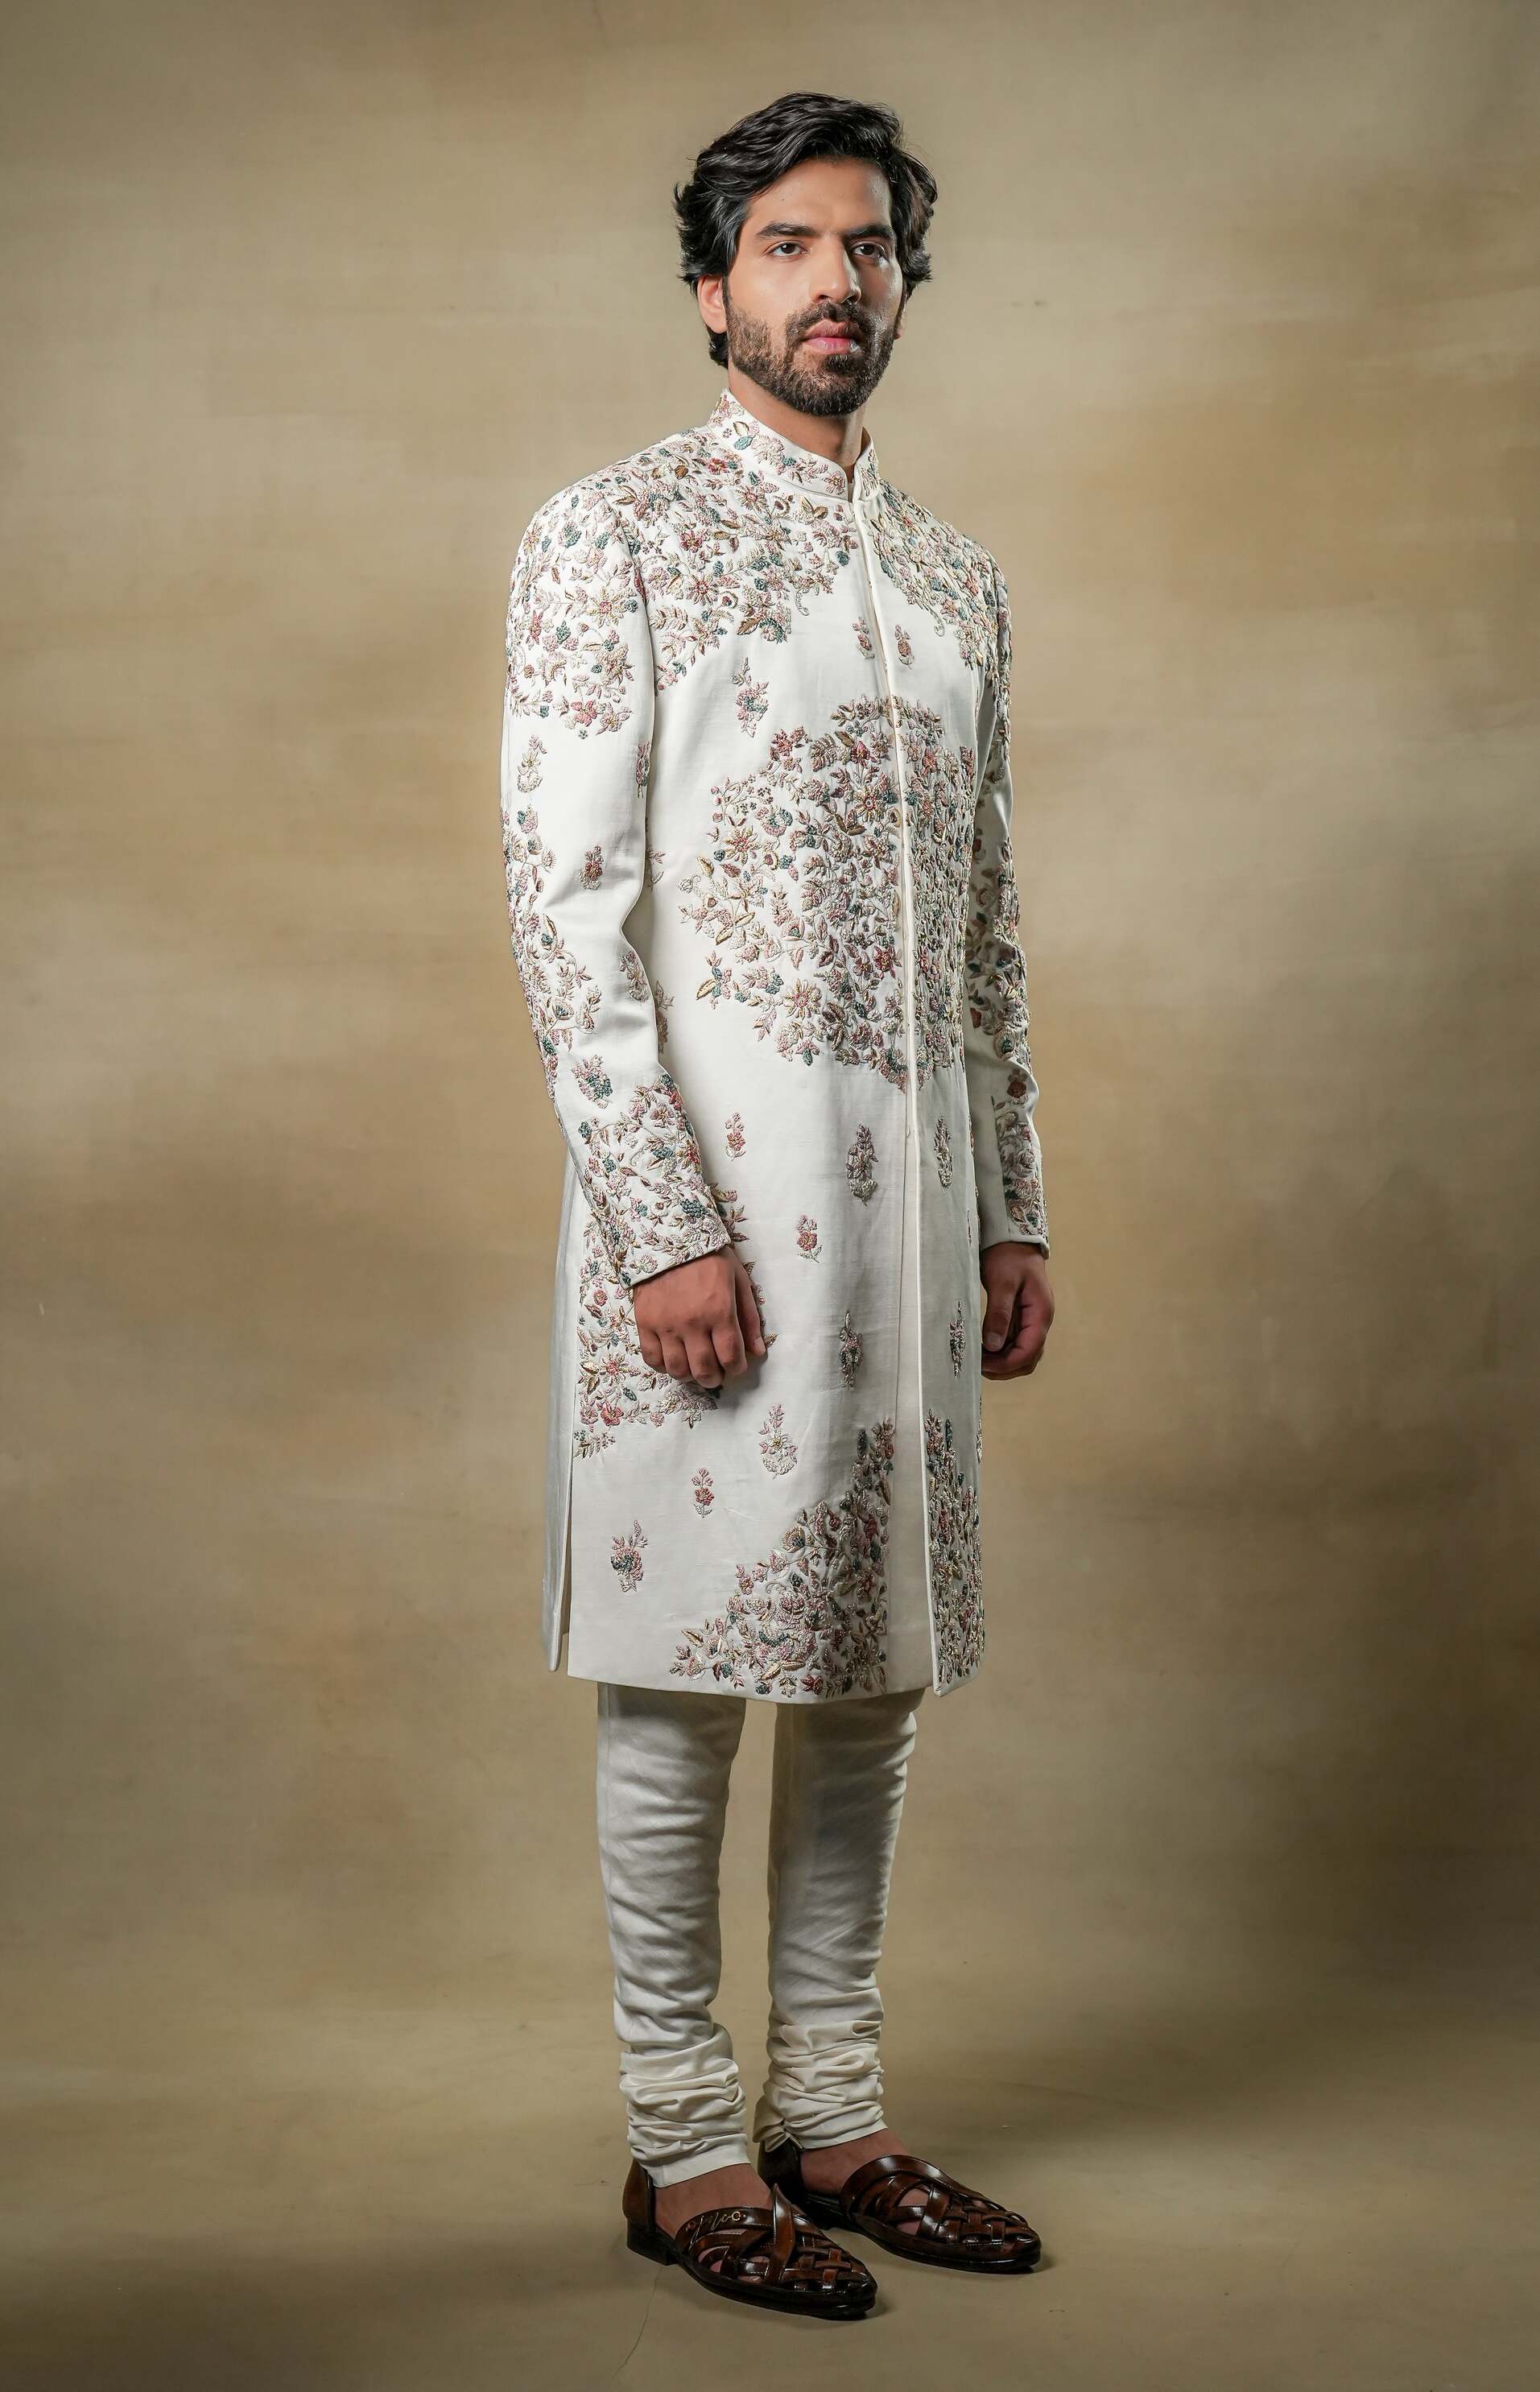 Full view of the Opaline Sherwani on a mannequin, highlighting its refined and elegant silhouette.